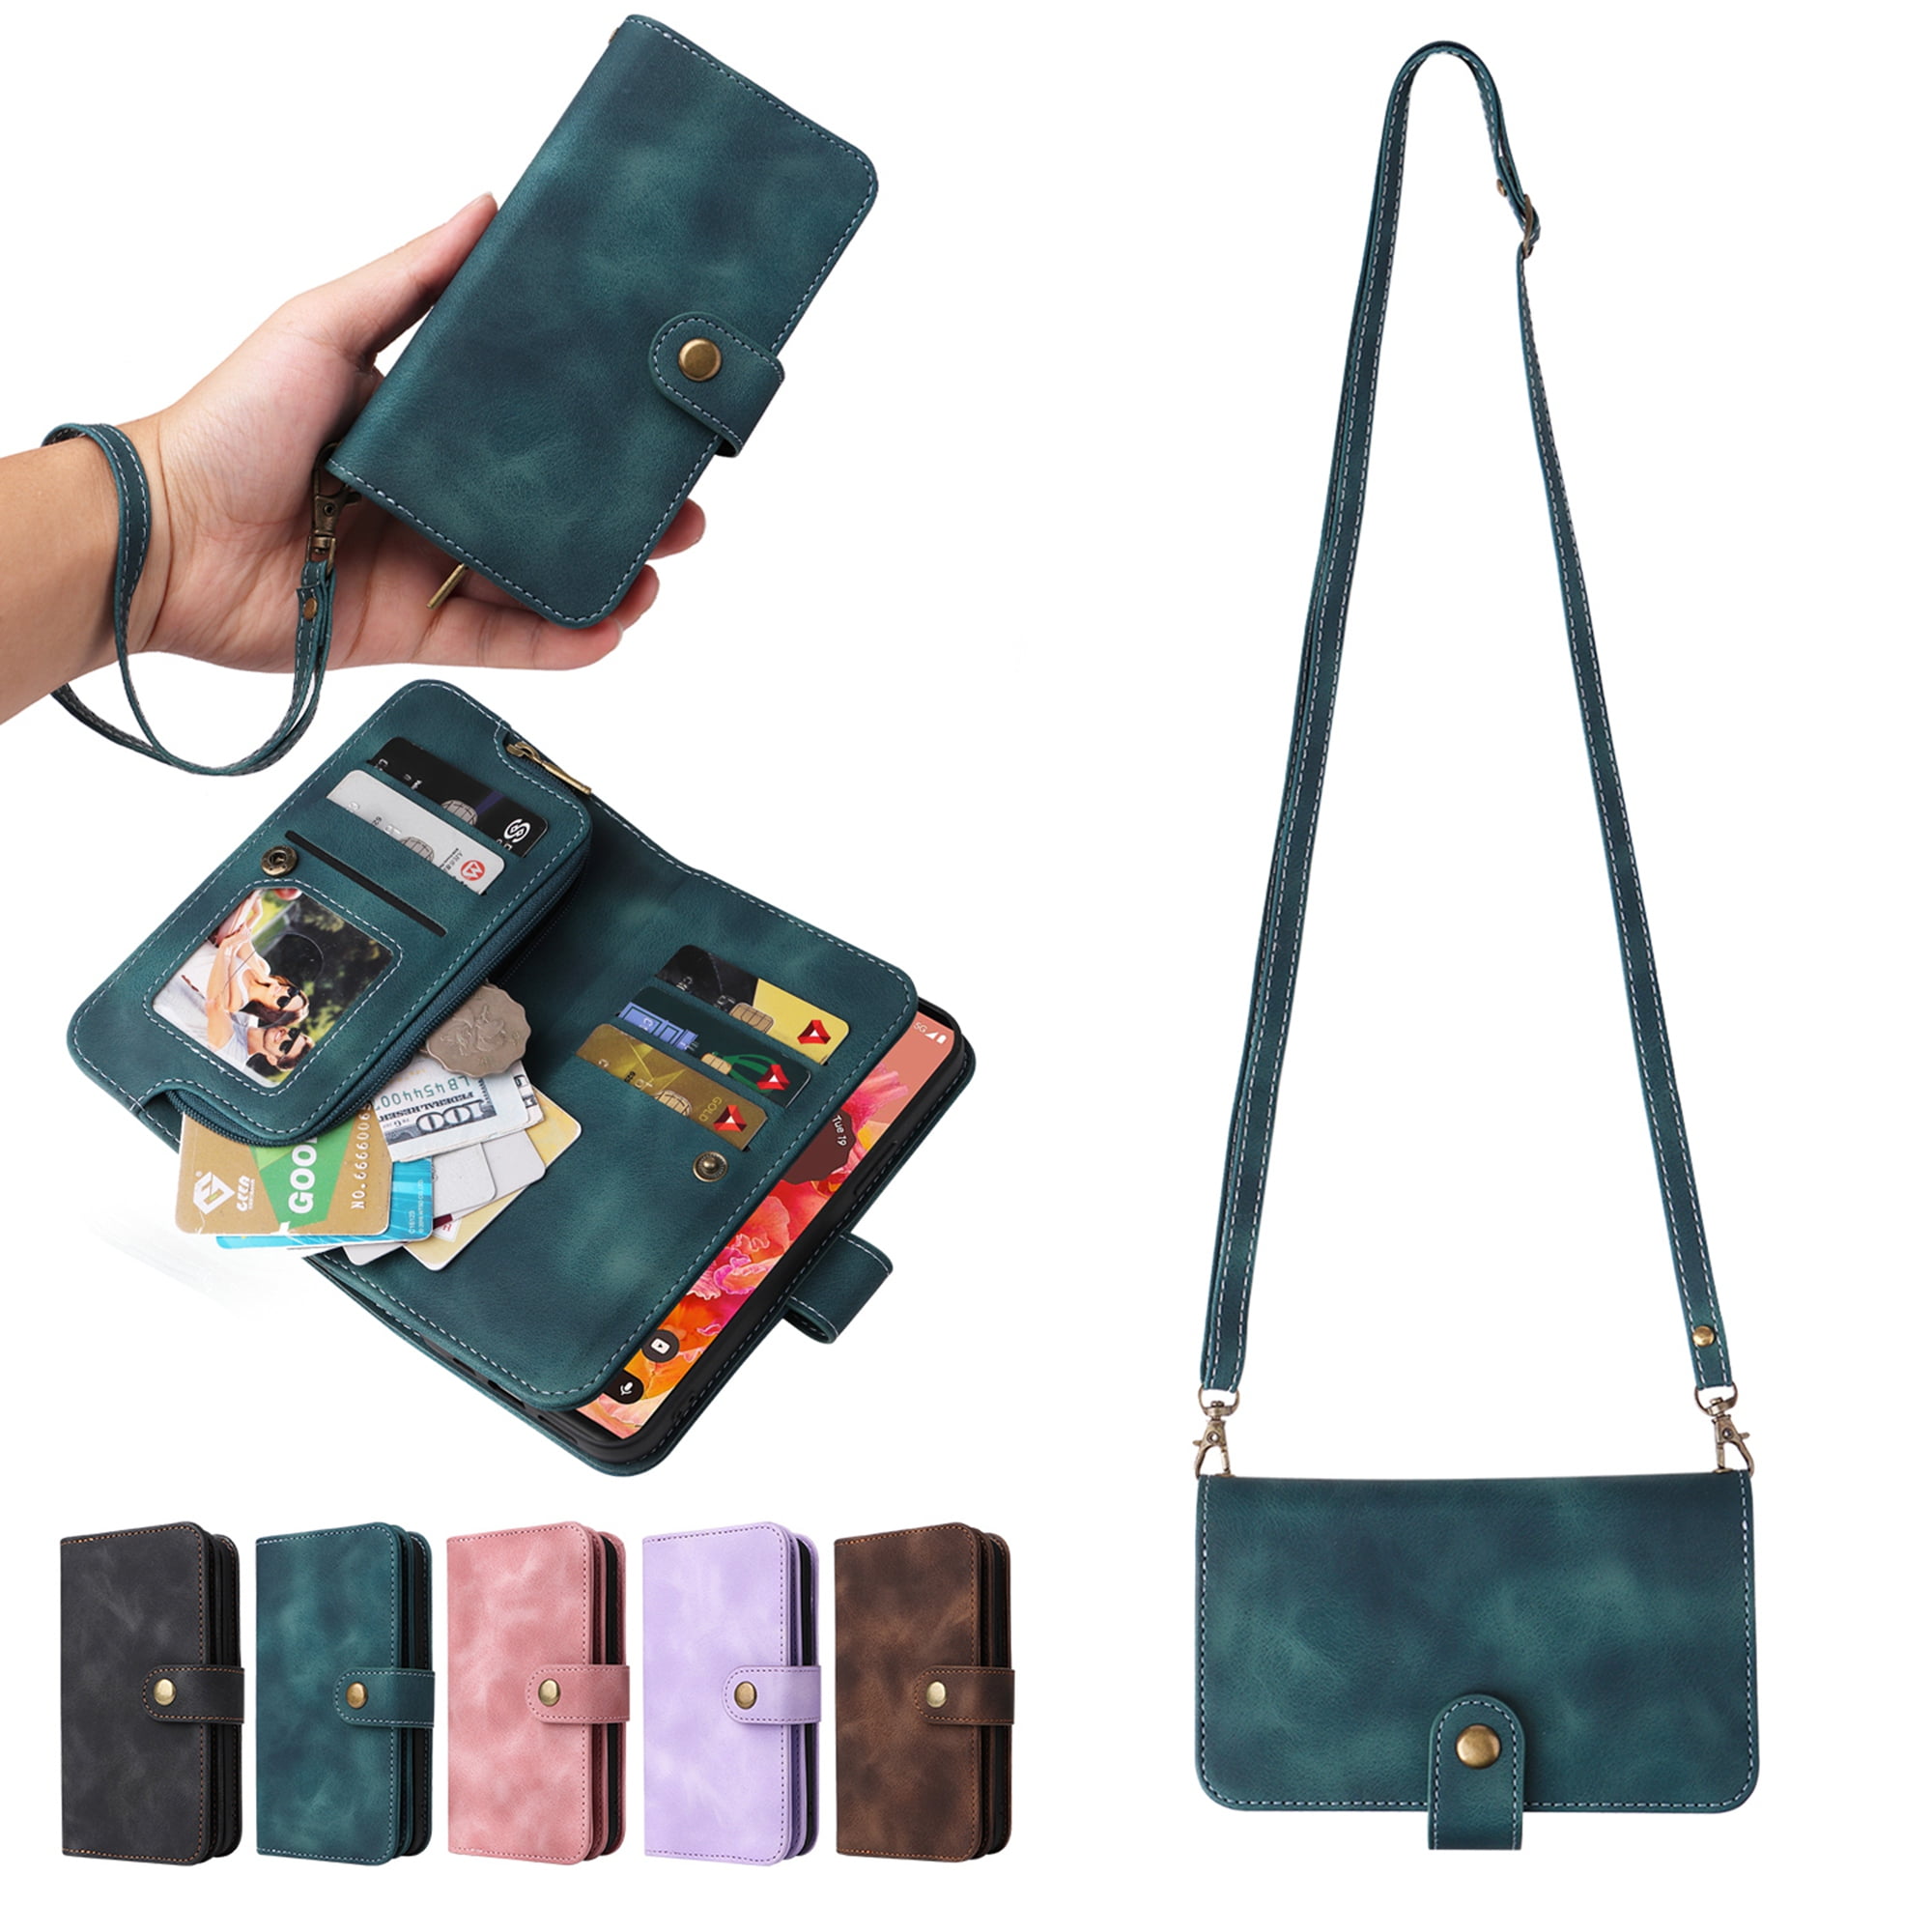 Dteck Crossbody Wallet Phone Case for iPhone 8/ iPhone 7/ iPhone SE 4.7 inch, Premium PU Leather Handbag Zipper Pocket with Lanyard Shoulder Strap